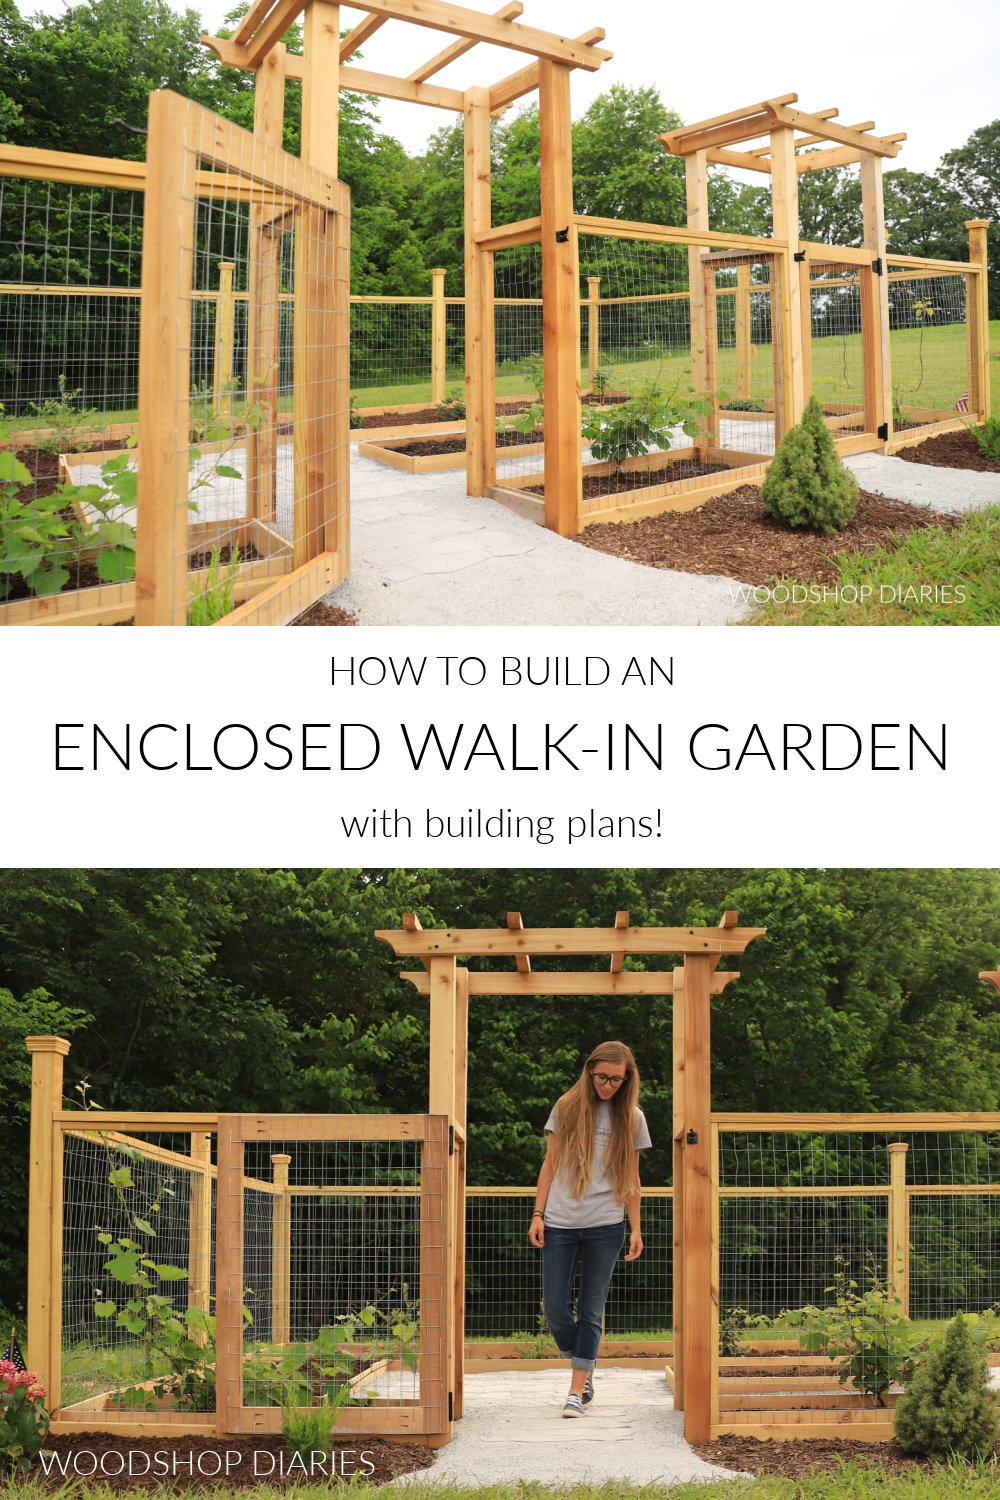 Pinterest collage showing two finished images of enclosed walk in garden at different angles with text "how to build an enclosed walk in garden with building plans!"